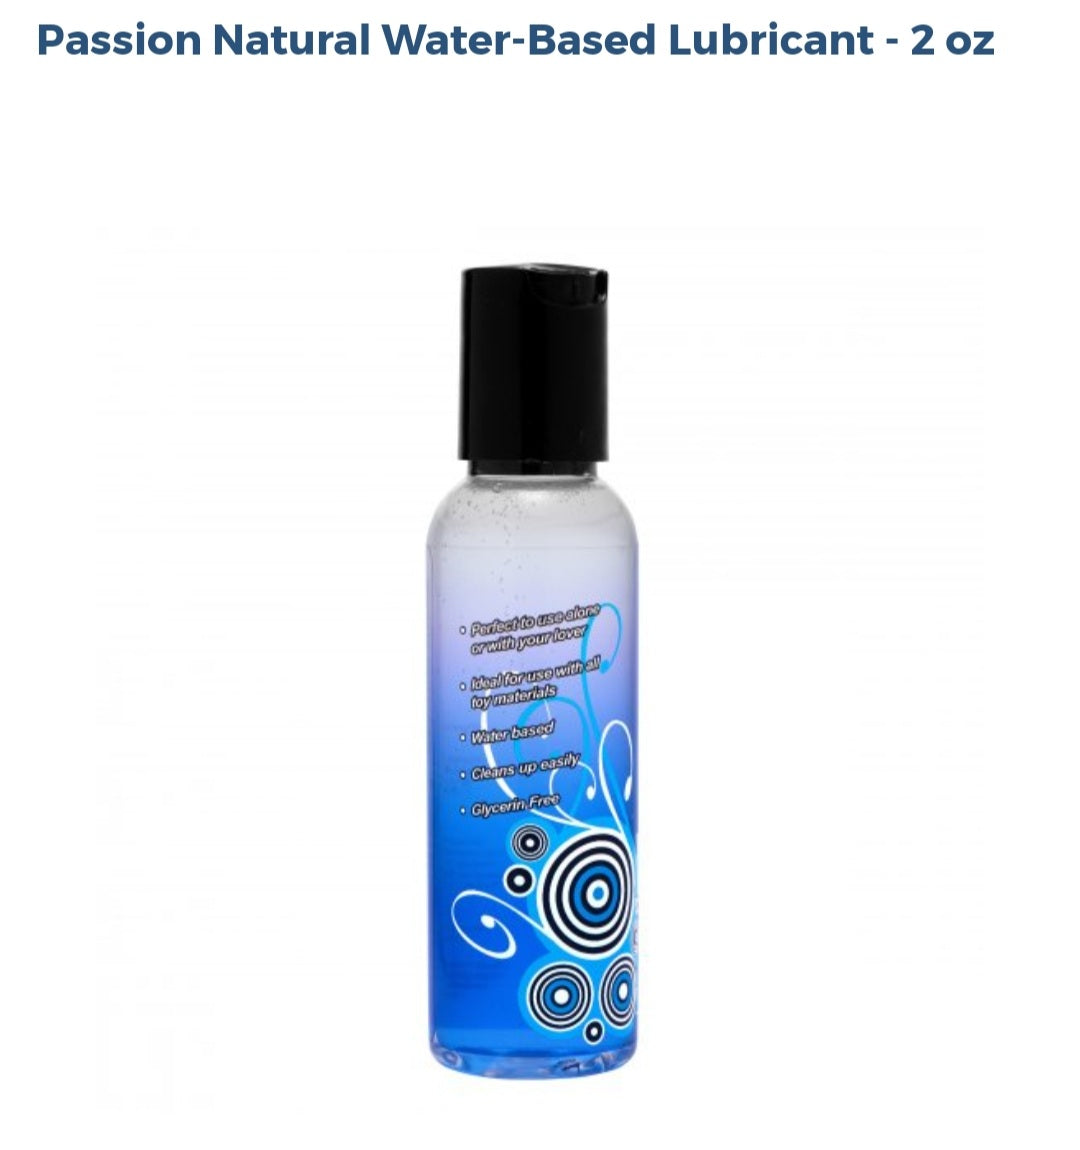 Passion Natural Water-Based Lubricant 2OZ